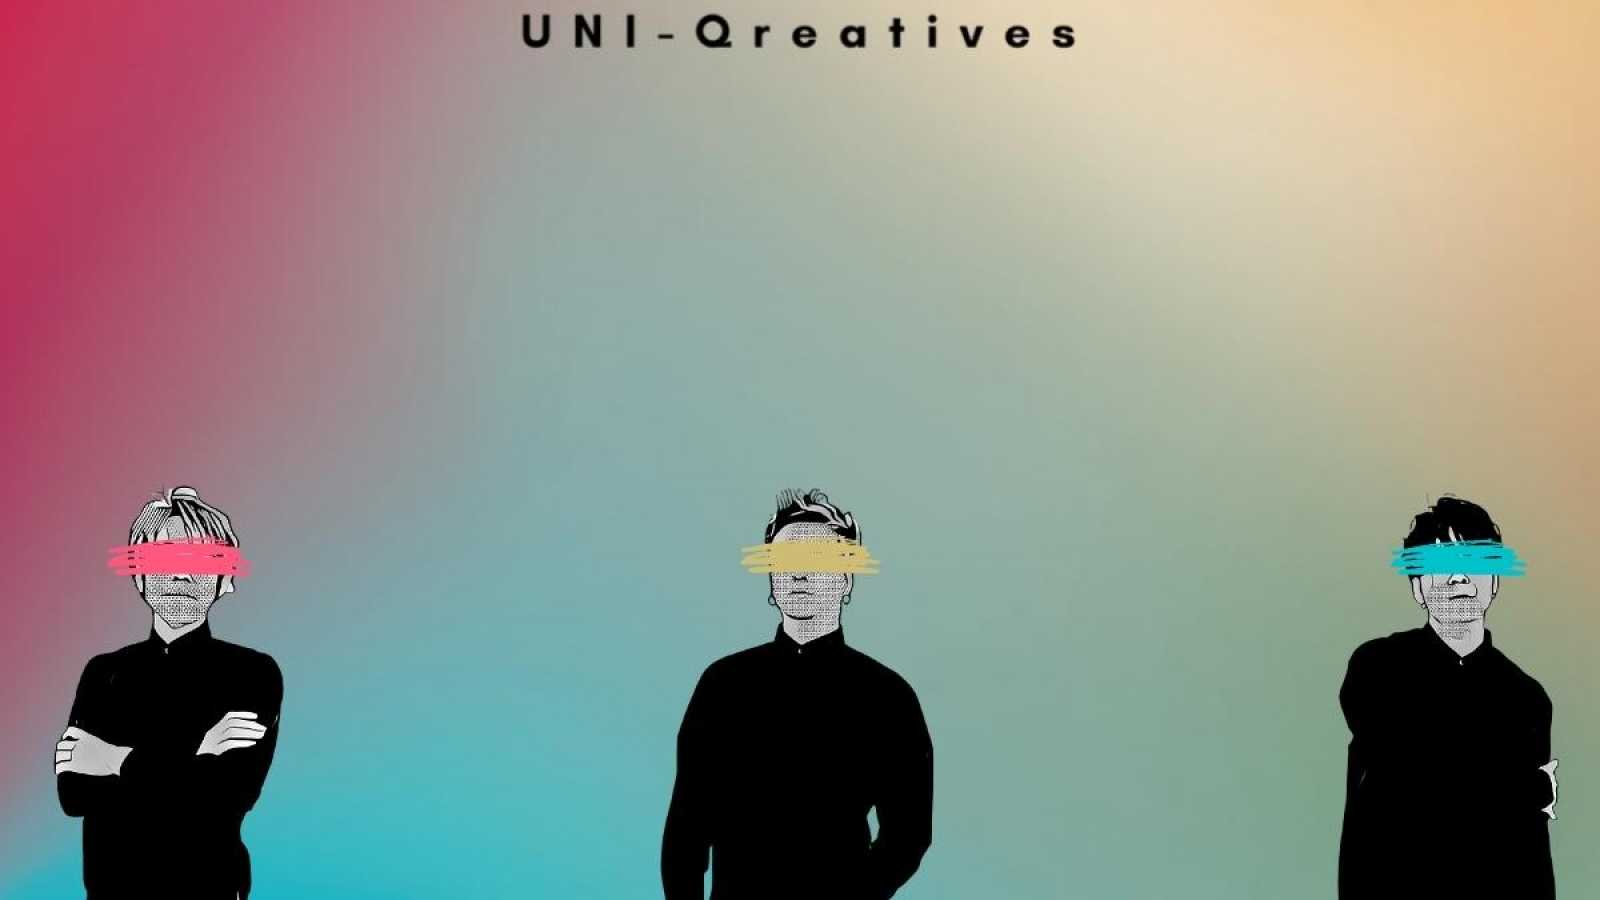 UNI-Qreatives © UNI-Qreatives. All rights reserved.